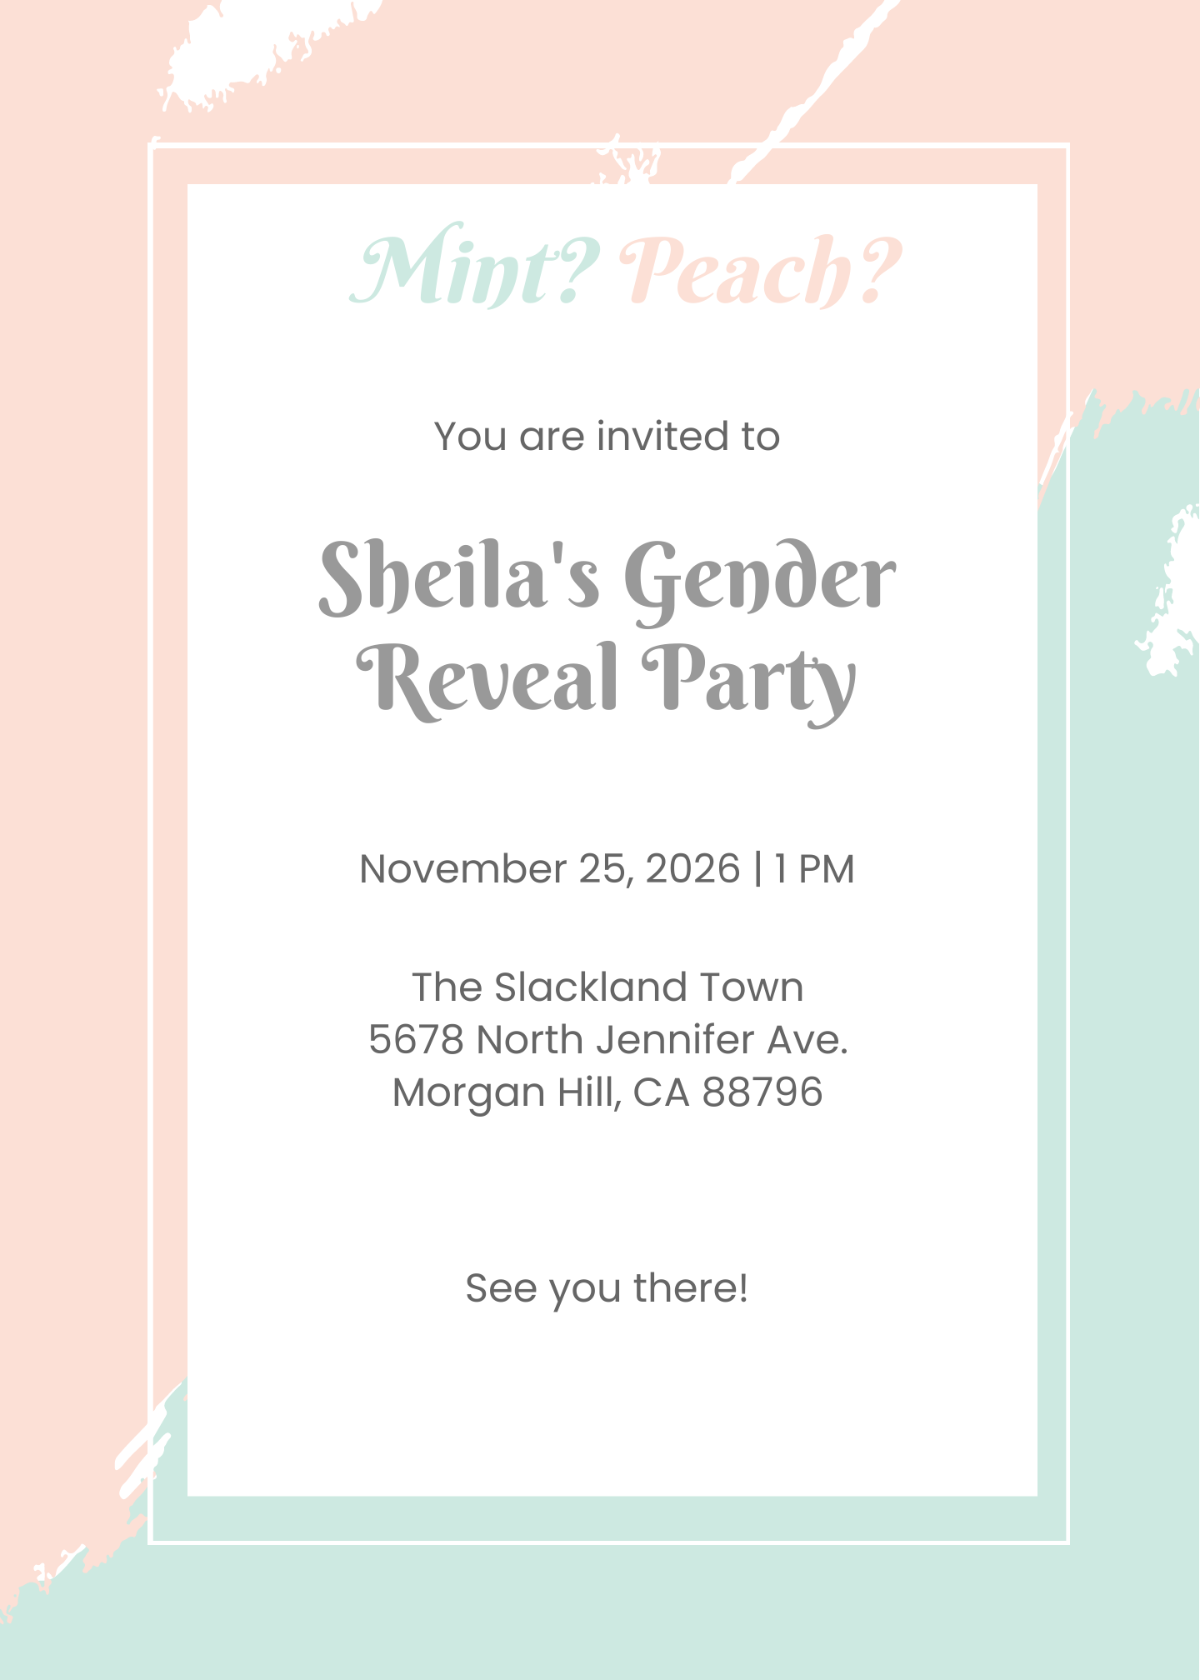 Mint and Peach Gender Reveal Invitation Template